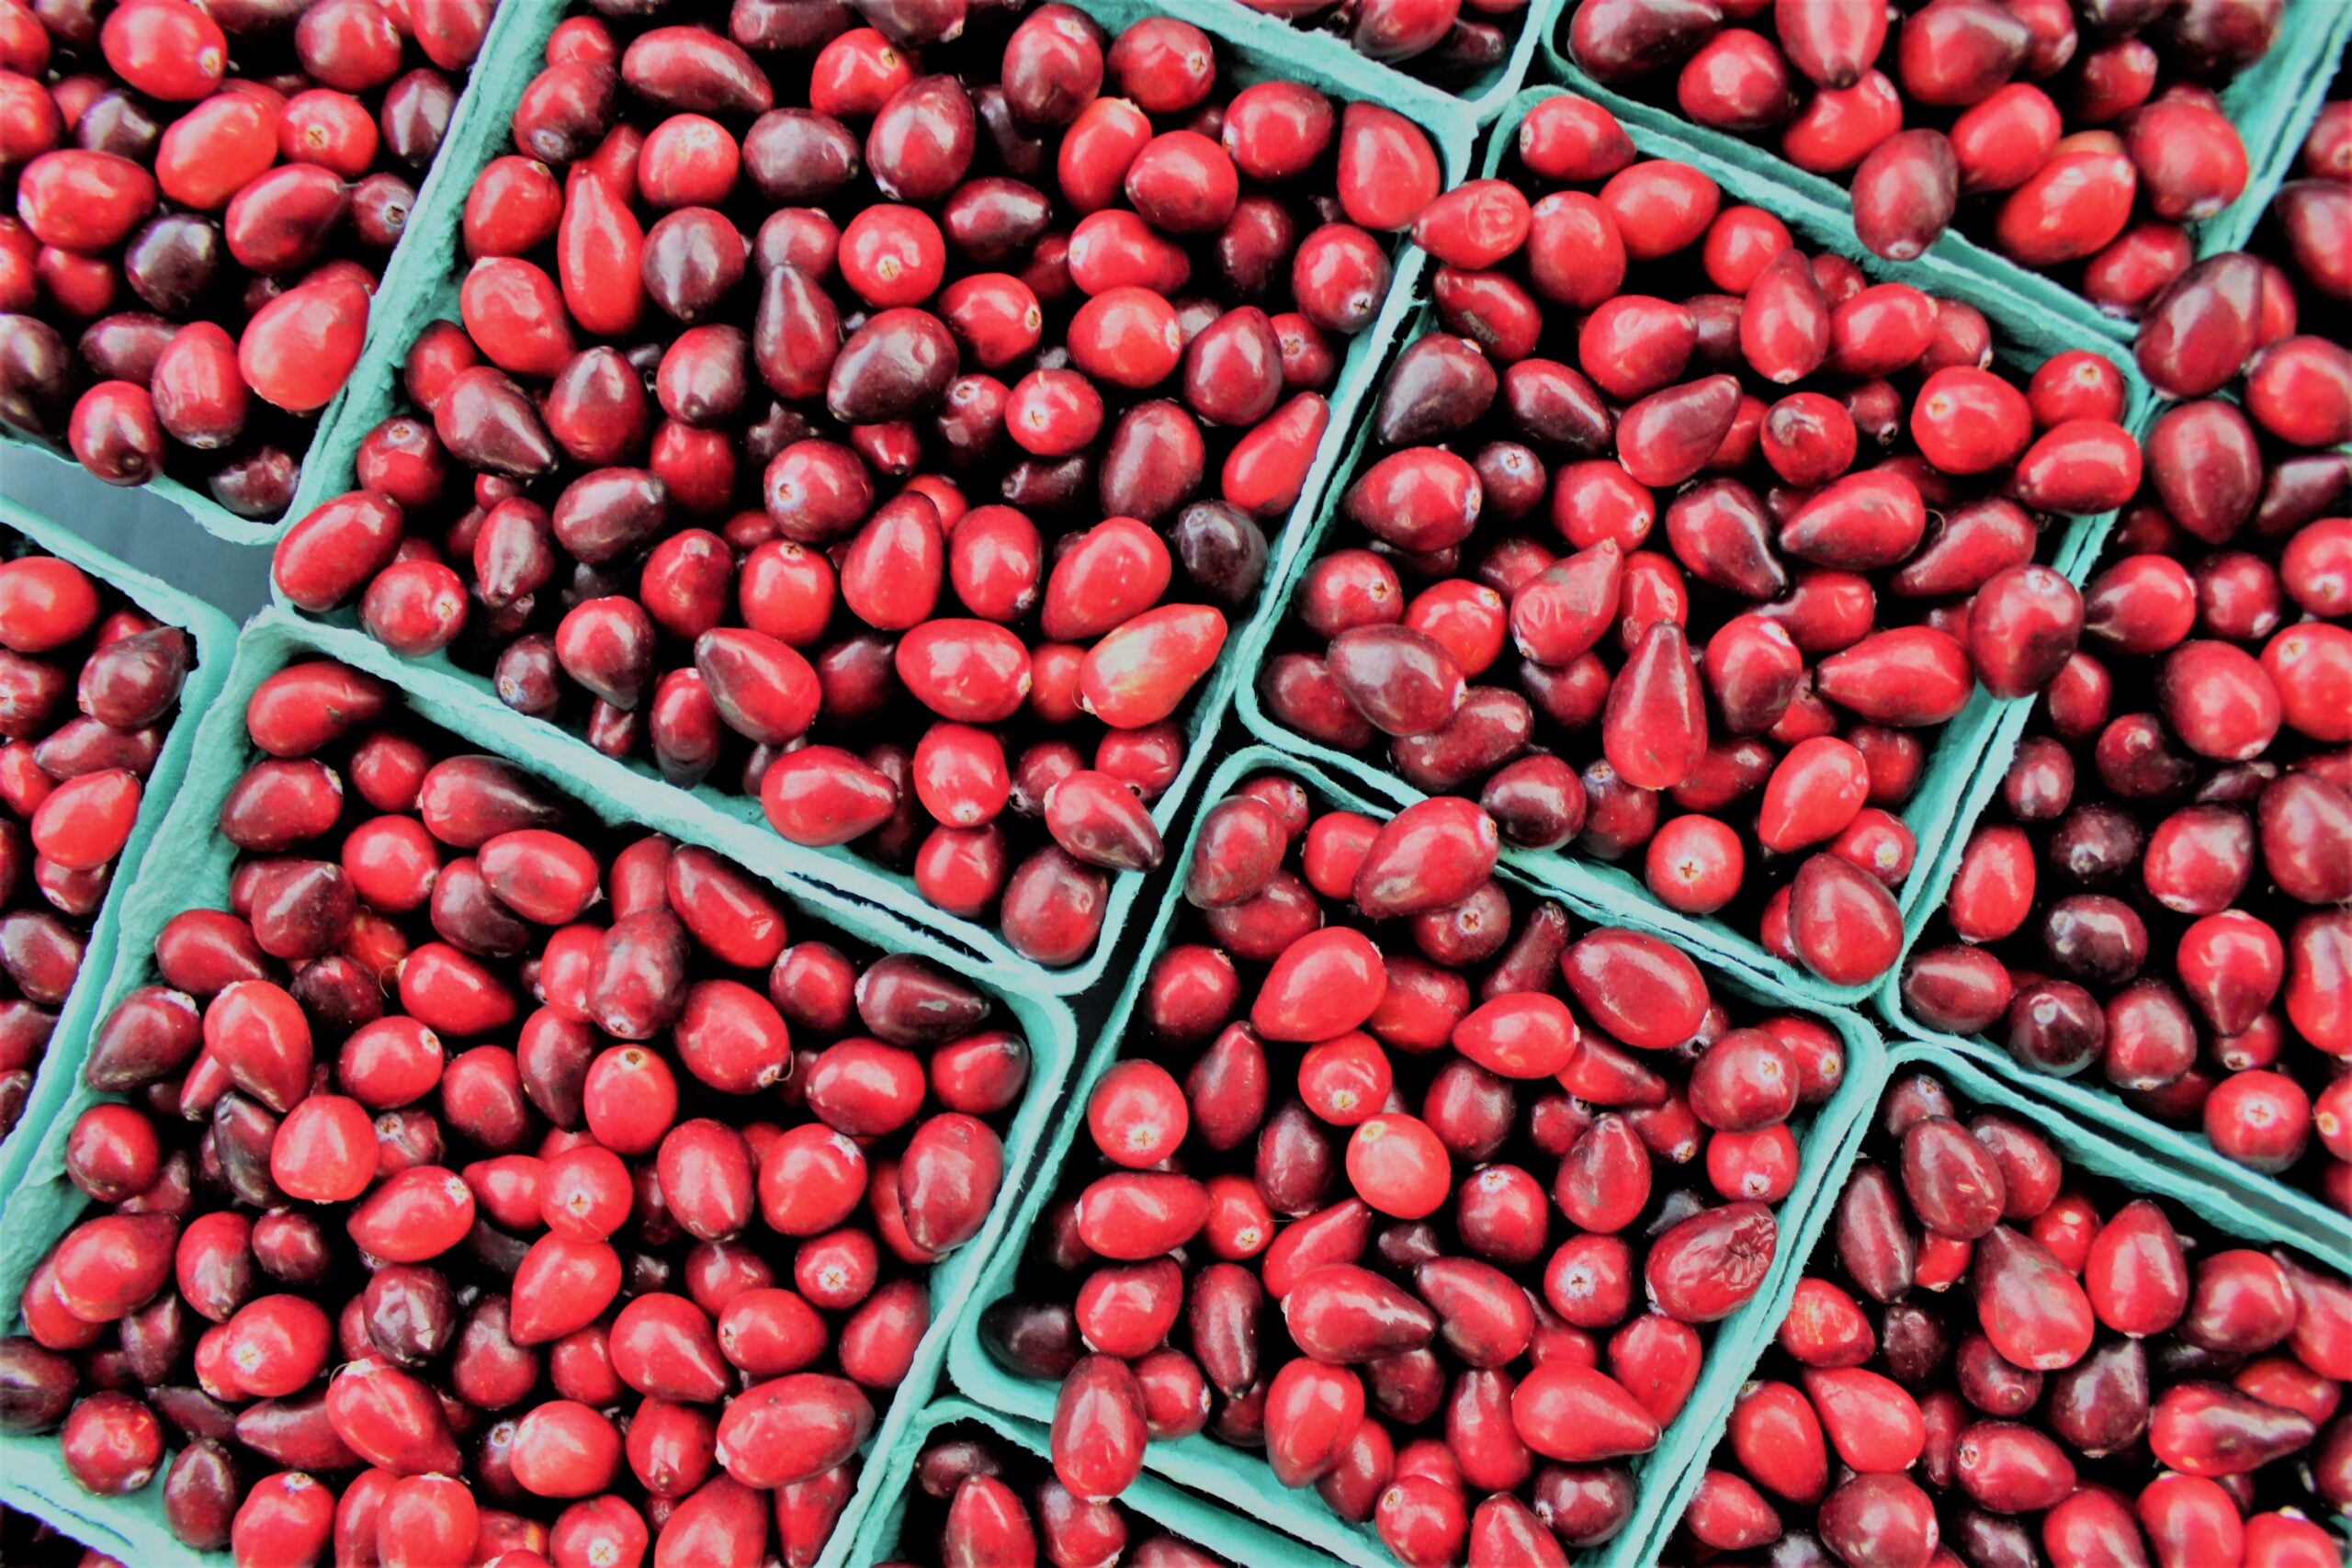 Cranberries at the market